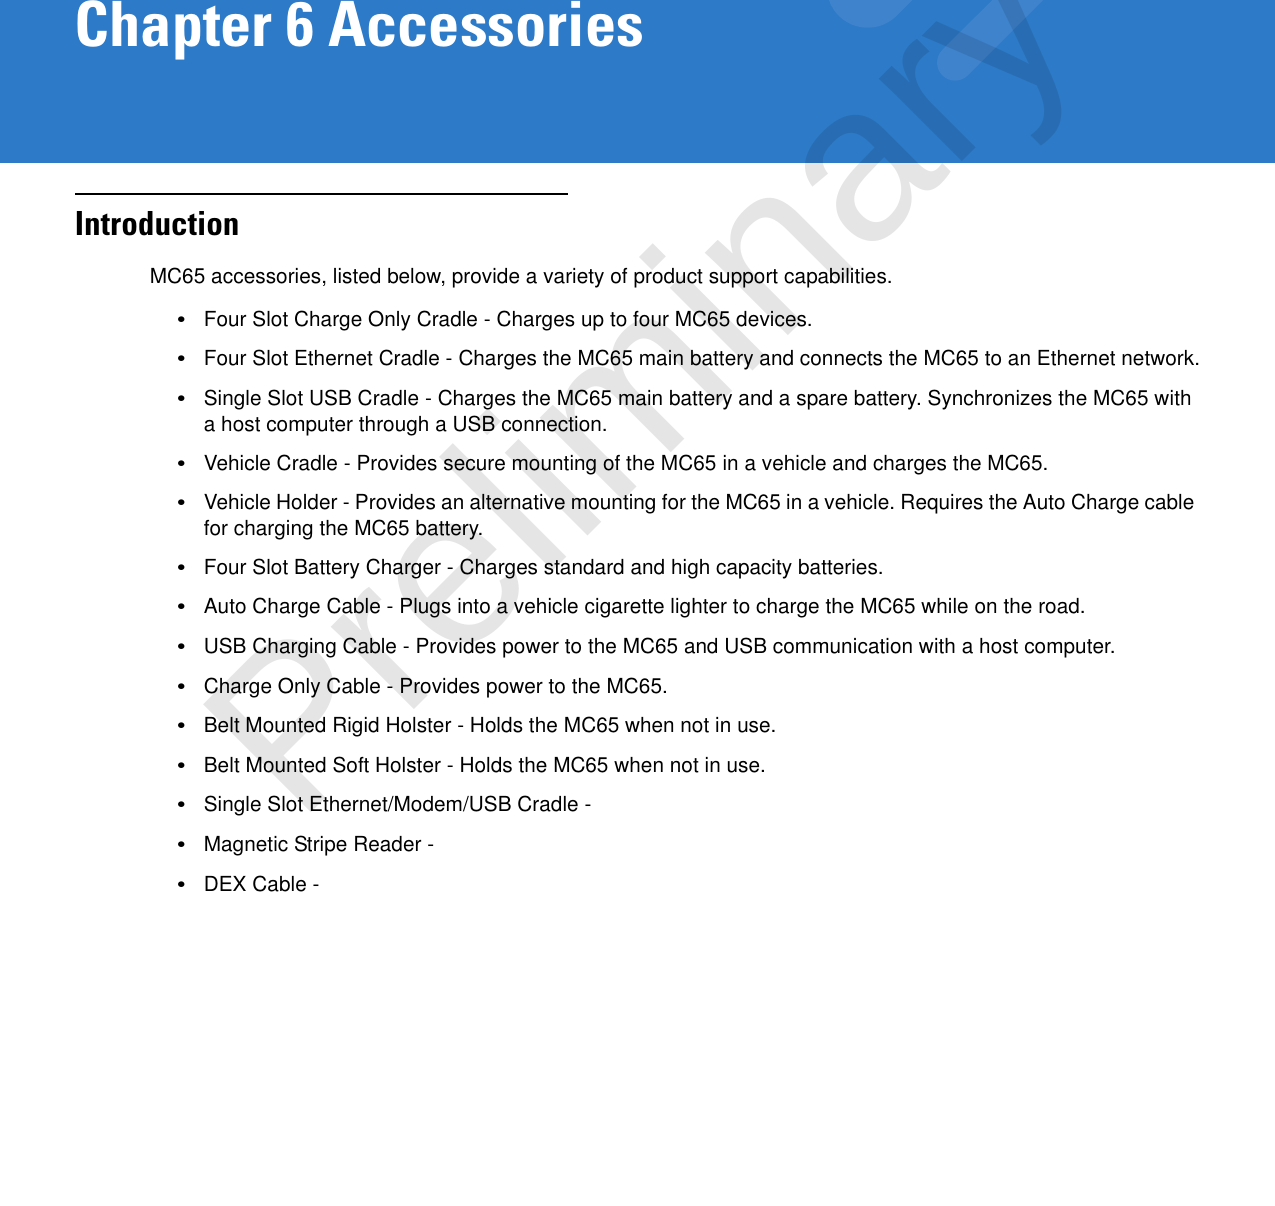 Chapter 6 AccessoriesIntroductionMC65 accessories, listed below, provide a variety of product support capabilities.•Four Slot Charge Only Cradle - Charges up to four MC65 devices.•Four Slot Ethernet Cradle - Charges the MC65 main battery and connects the MC65 to an Ethernet network.•Single Slot USB Cradle - Charges the MC65 main battery and a spare battery. Synchronizes the MC65 with a host computer through a USB connection.•Vehicle Cradle - Provides secure mounting of the MC65 in a vehicle and charges the MC65.•Vehicle Holder - Provides an alternative mounting for the MC65 in a vehicle. Requires the Auto Charge cable for charging the MC65 battery.•Four Slot Battery Charger - Charges standard and high capacity batteries.•Auto Charge Cable - Plugs into a vehicle cigarette lighter to charge the MC65 while on the road.•USB Charging Cable - Provides power to the MC65 and USB communication with a host computer.•Charge Only Cable - Provides power to the MC65.•Belt Mounted Rigid Holster - Holds the MC65 when not in use.•Belt Mounted Soft Holster - Holds the MC65 when not in use.•Single Slot Ethernet/Modem/USB Cradle - •Magnetic Stripe Reader - •DEX Cable - Preliminary